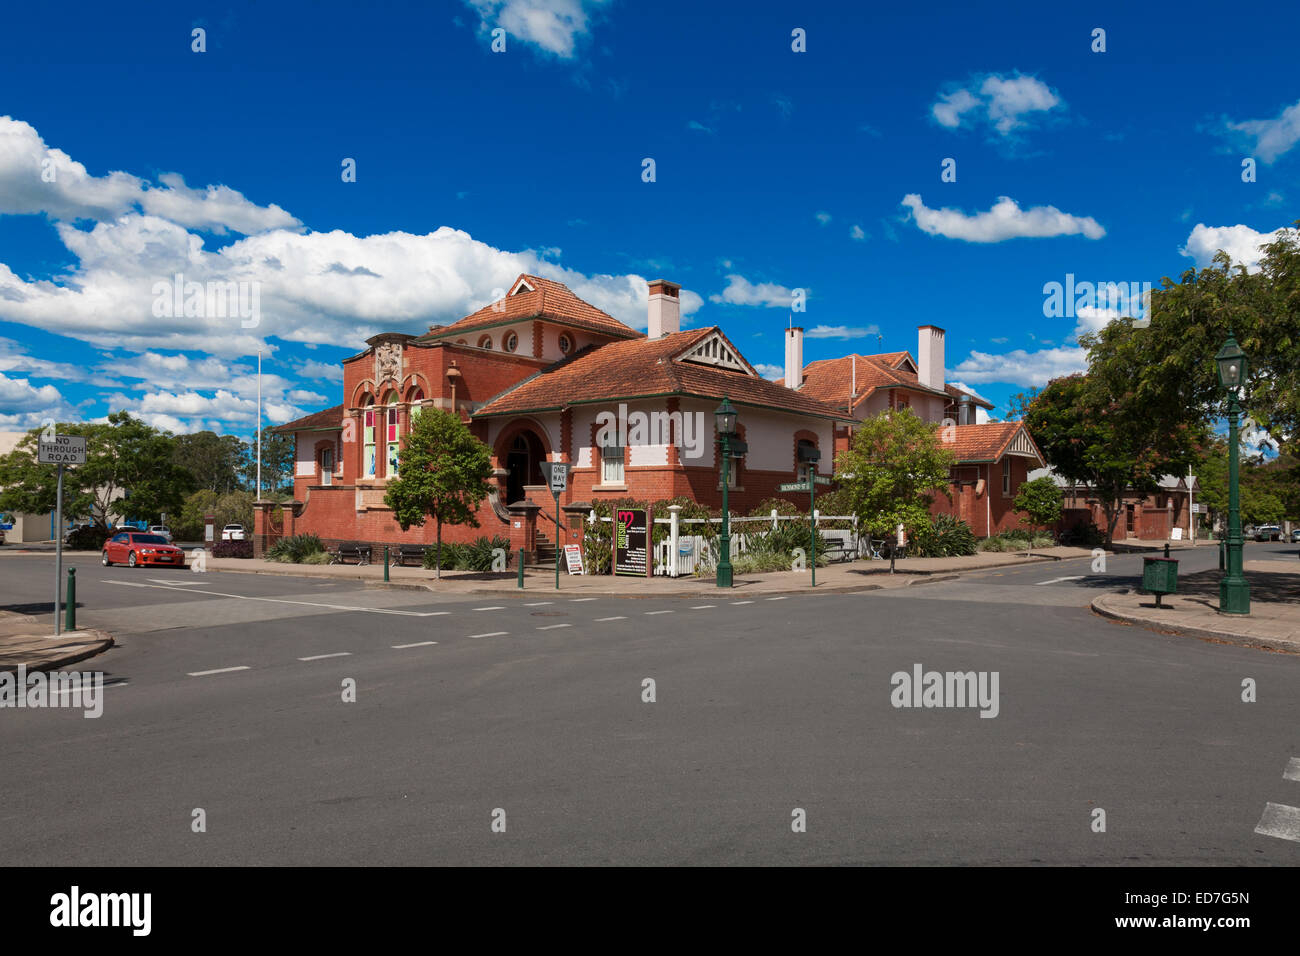 The Federation style building, built in 1900, was Maryborough's second Customs House. Maryborough Queensland Australia Stock Photo